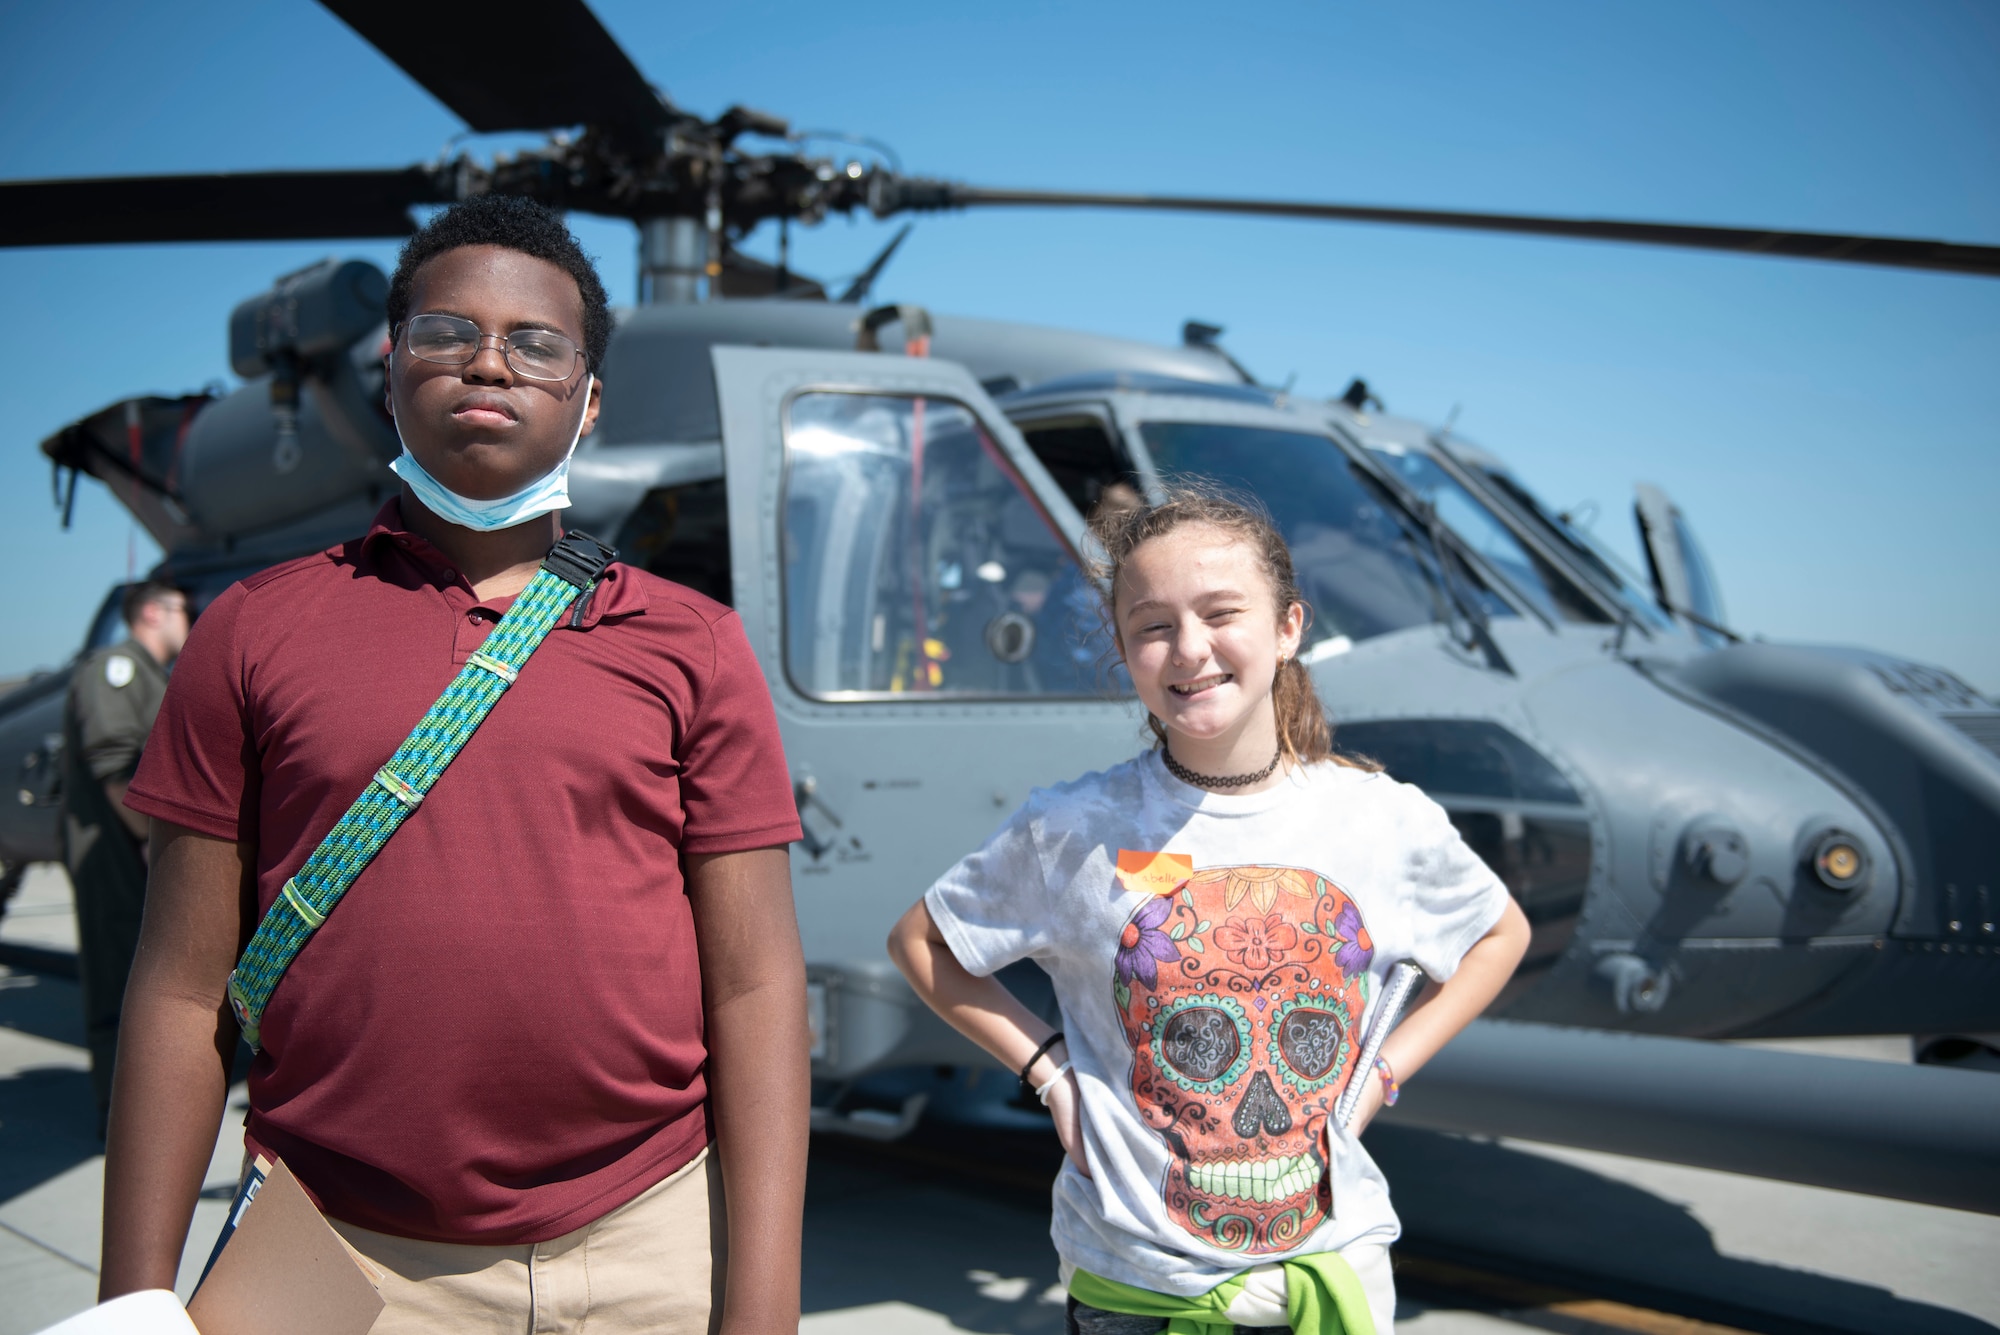 Nicolas, left, and Annabelle, right,pose in front of an HH-60W Jolly Green II helicopter during Teen Shadow Day at Moody Air Force Base, Georgia, June 22, 2022. Nicholas and Annabelle shadowed Moody Public Affairs and gained hands-on experience in interviewing subject matter experts and photography during Teen Shadow Day. (U.S. Air Force photo by Staff Sgt. Thomas Johns)